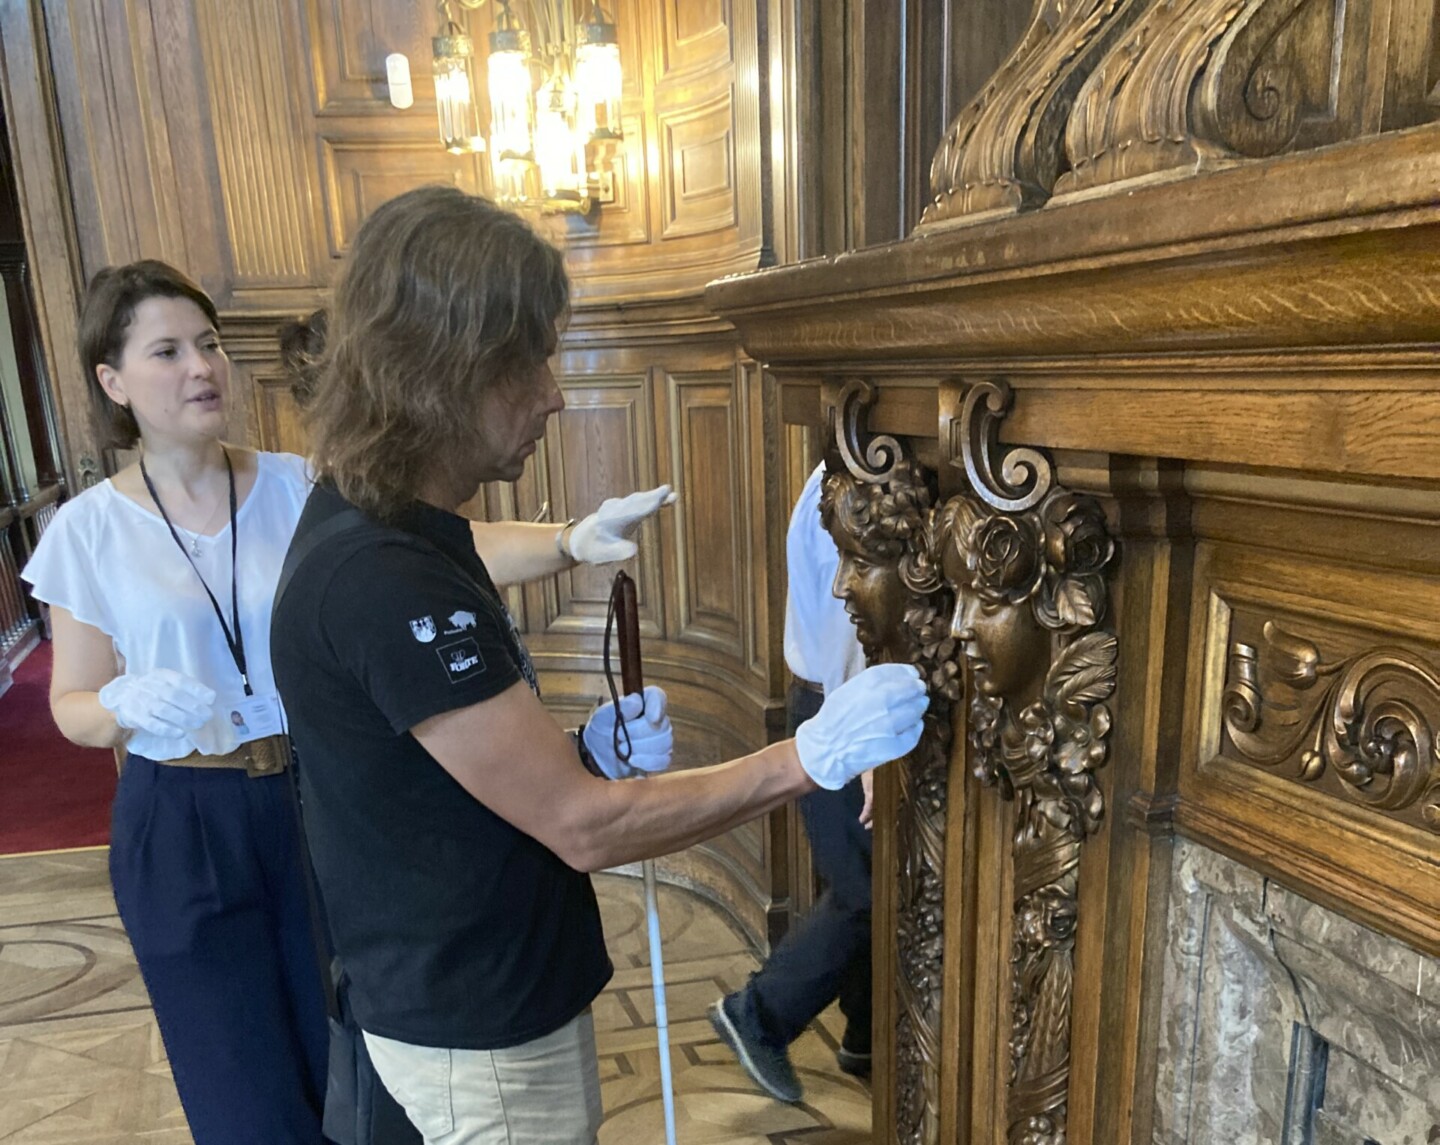 A woman wearing white gloves stands next to a man holding a cane for the blind and also wearing white gloves. He is touching a brass-coloured relief in the shape of a head on a richly decorated mantelpiece.